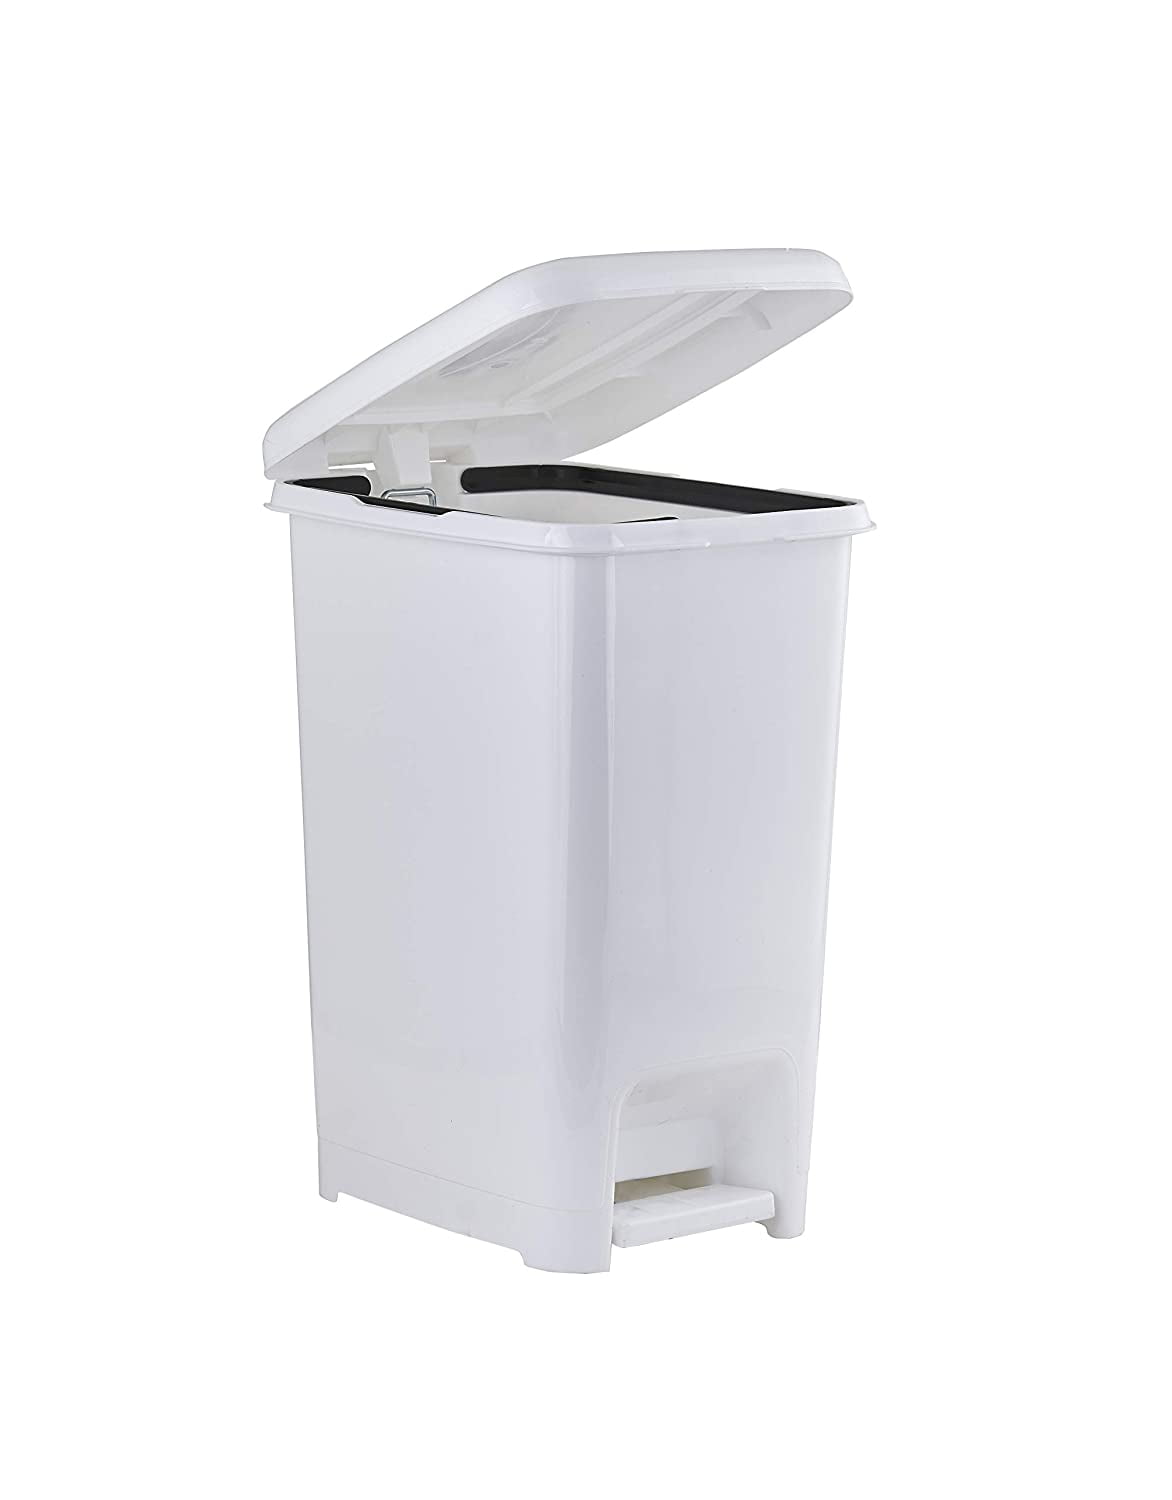 Slim 10.5-gal Step on Space Savor Trash Can with Lid Beige Color By Superio 